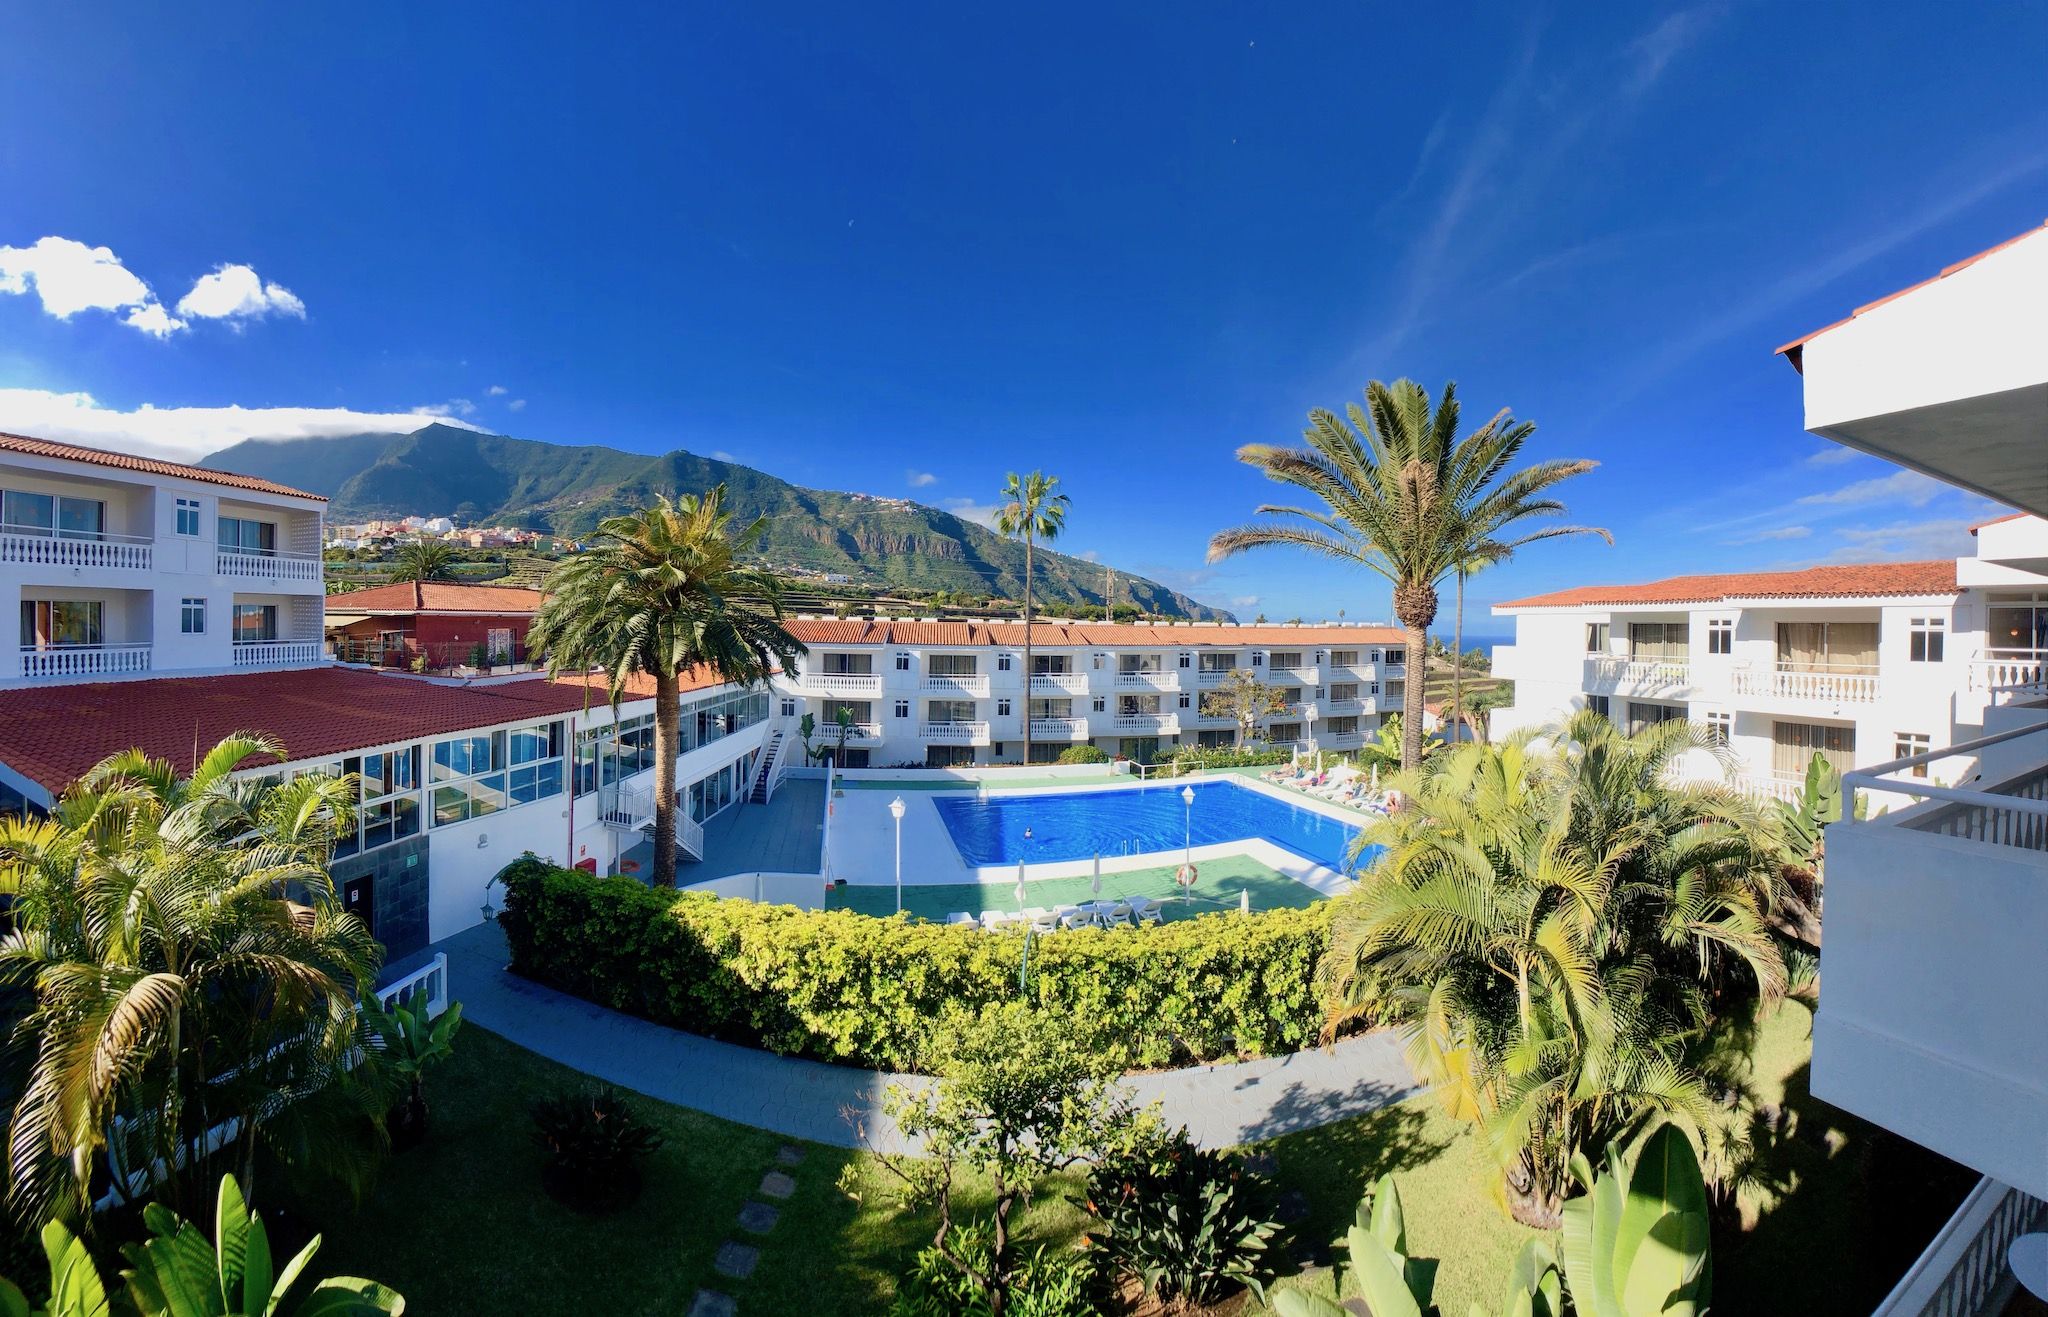 The Active Route Hotel in Los Realejos: the perfect starting point for all activities in Tenerife. Photo: Sascha Tegtmeyer